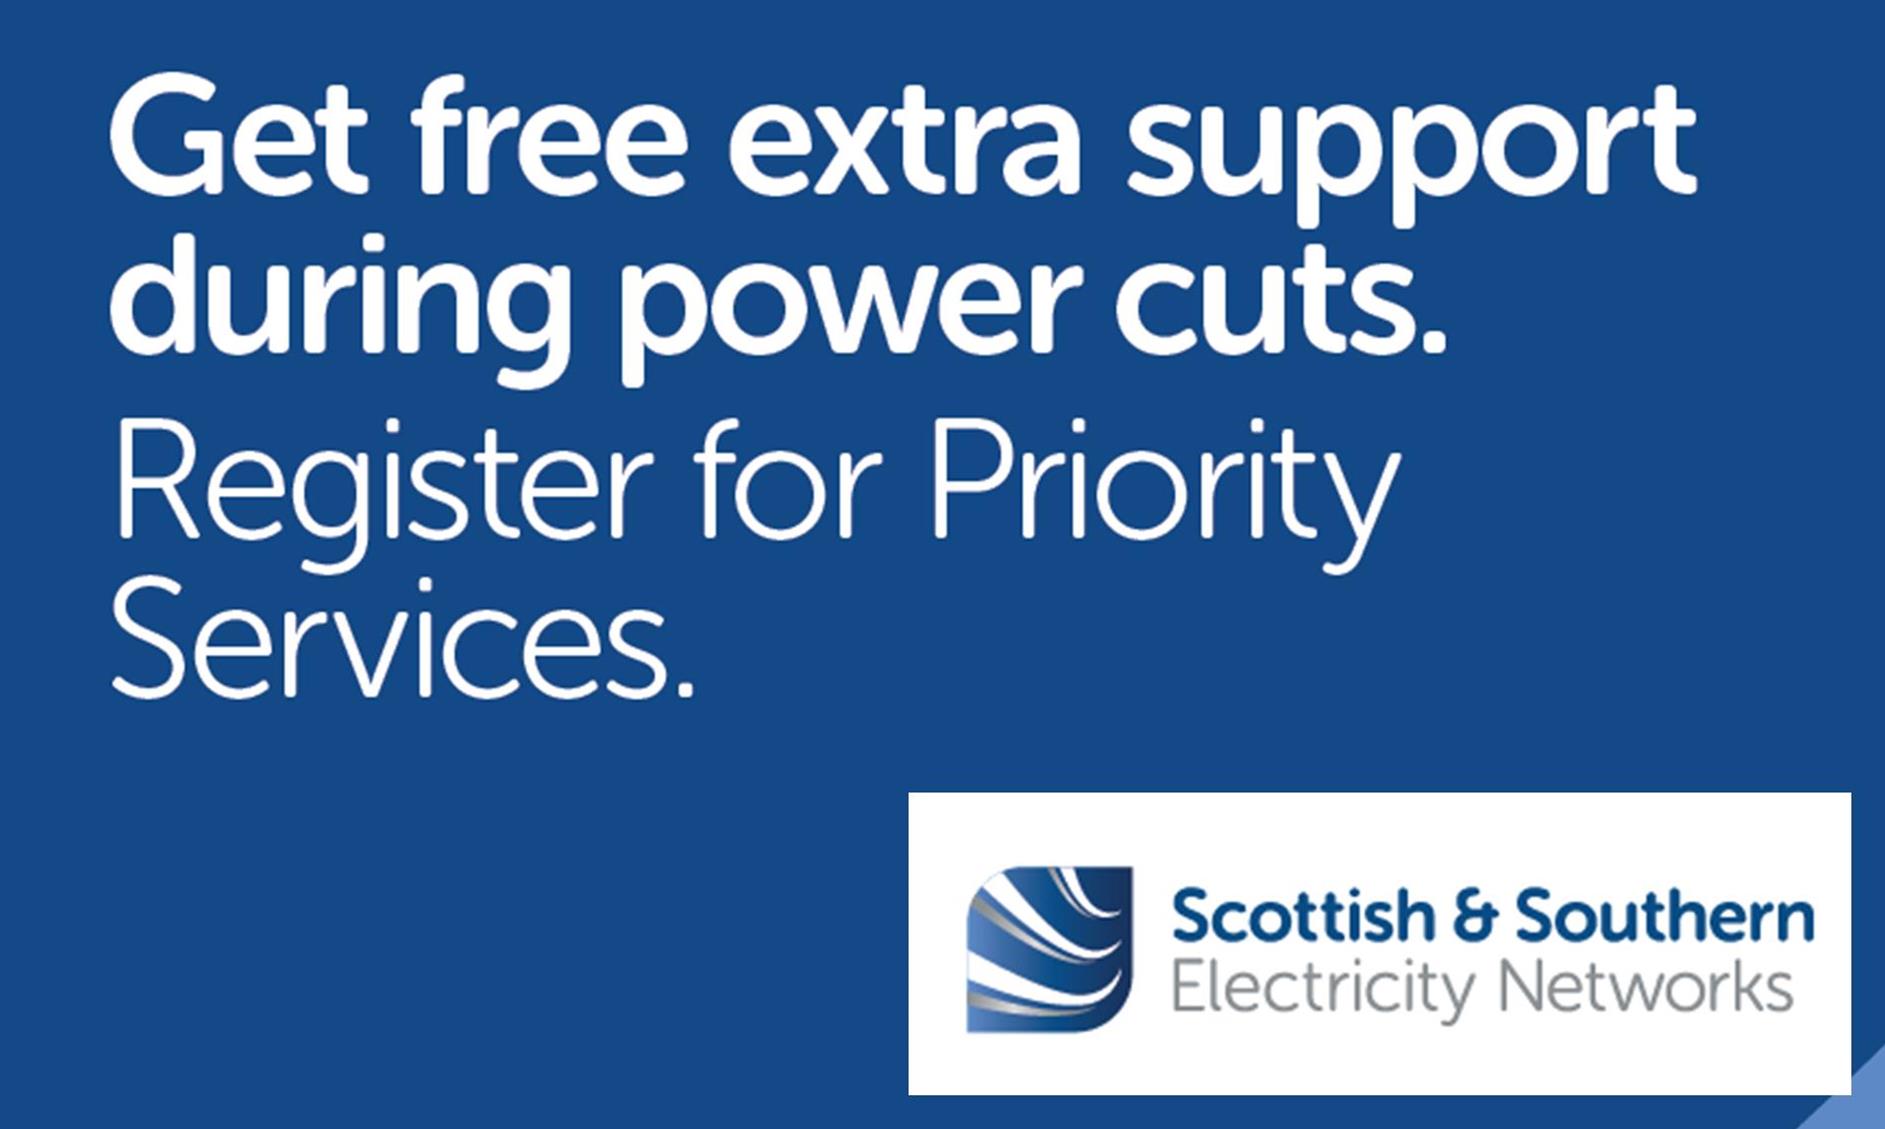 Get extra support during power cuts